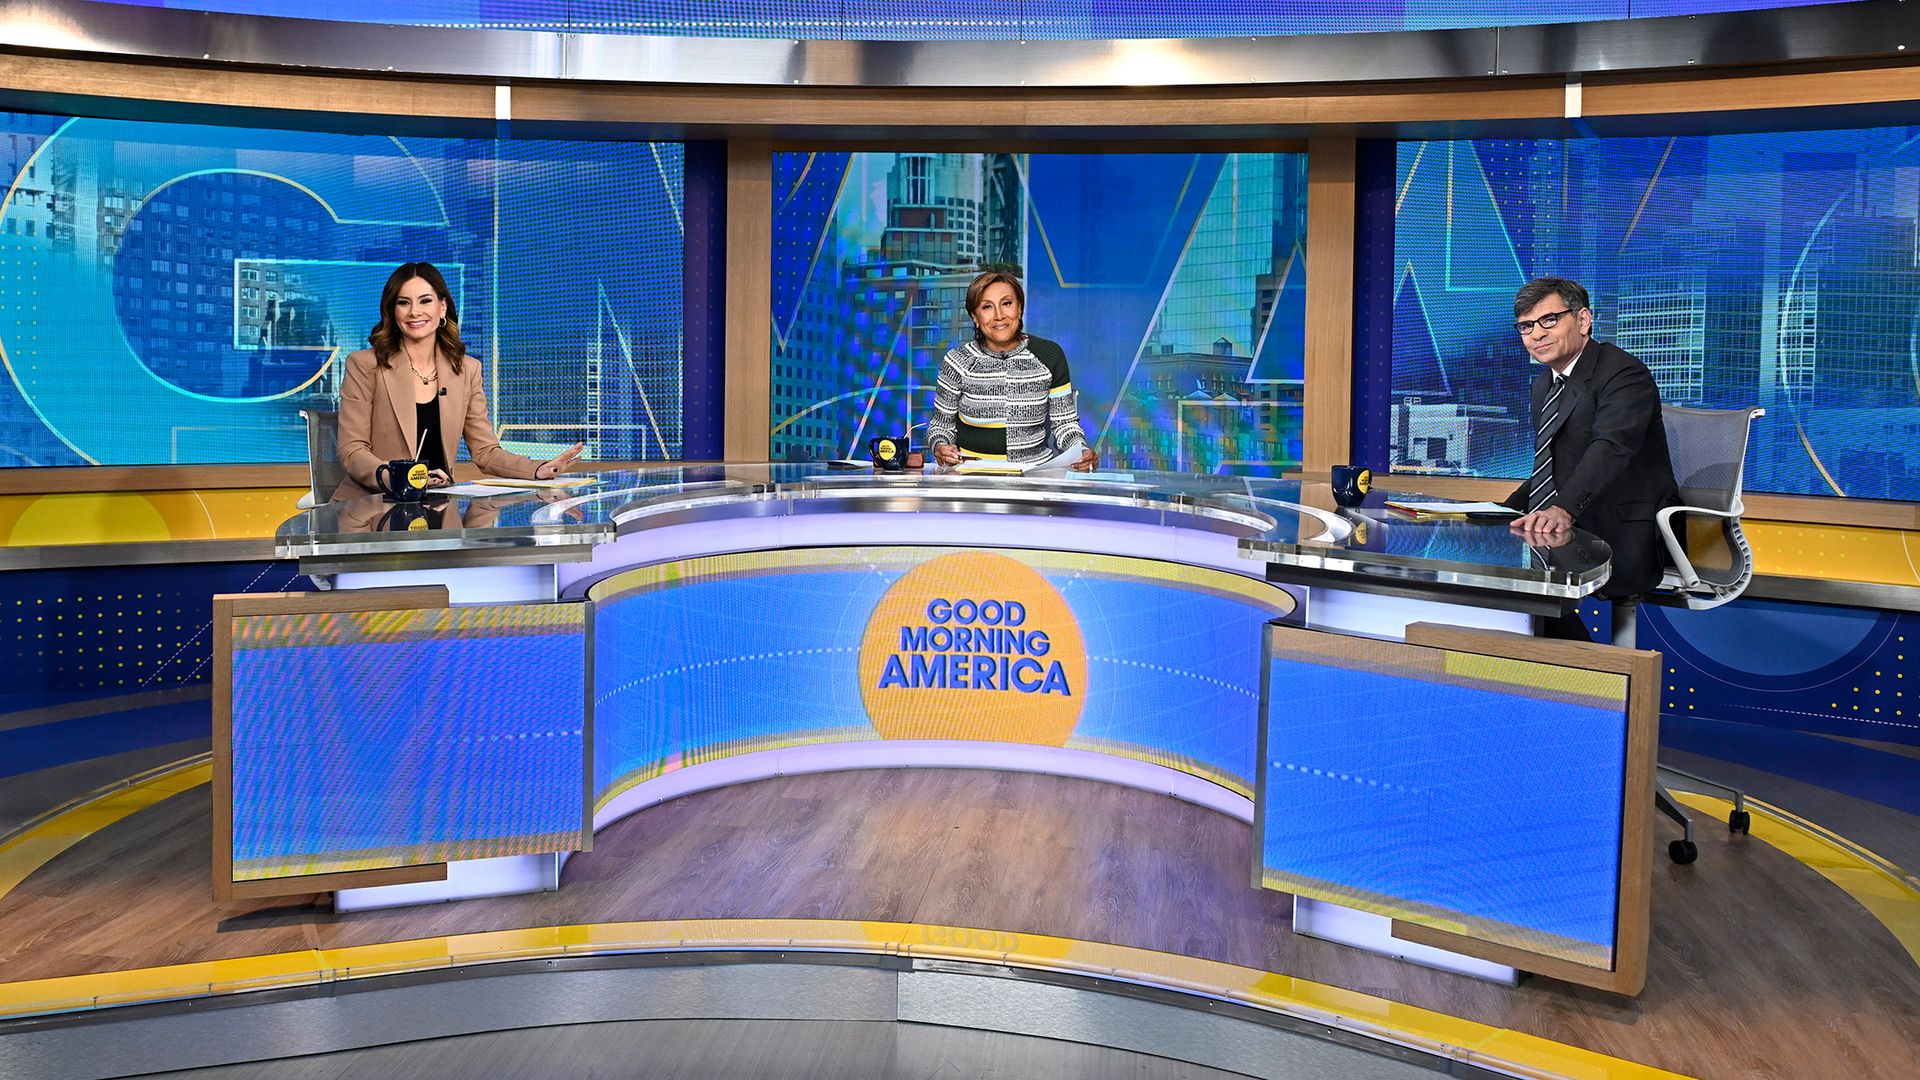 Show coverage of Good Morning America on Wednesday, March 1, 2023 on ABC with REBECCA JARVIS, ROBIN ROBERTS, GEORGE STEPHANOPOULOS